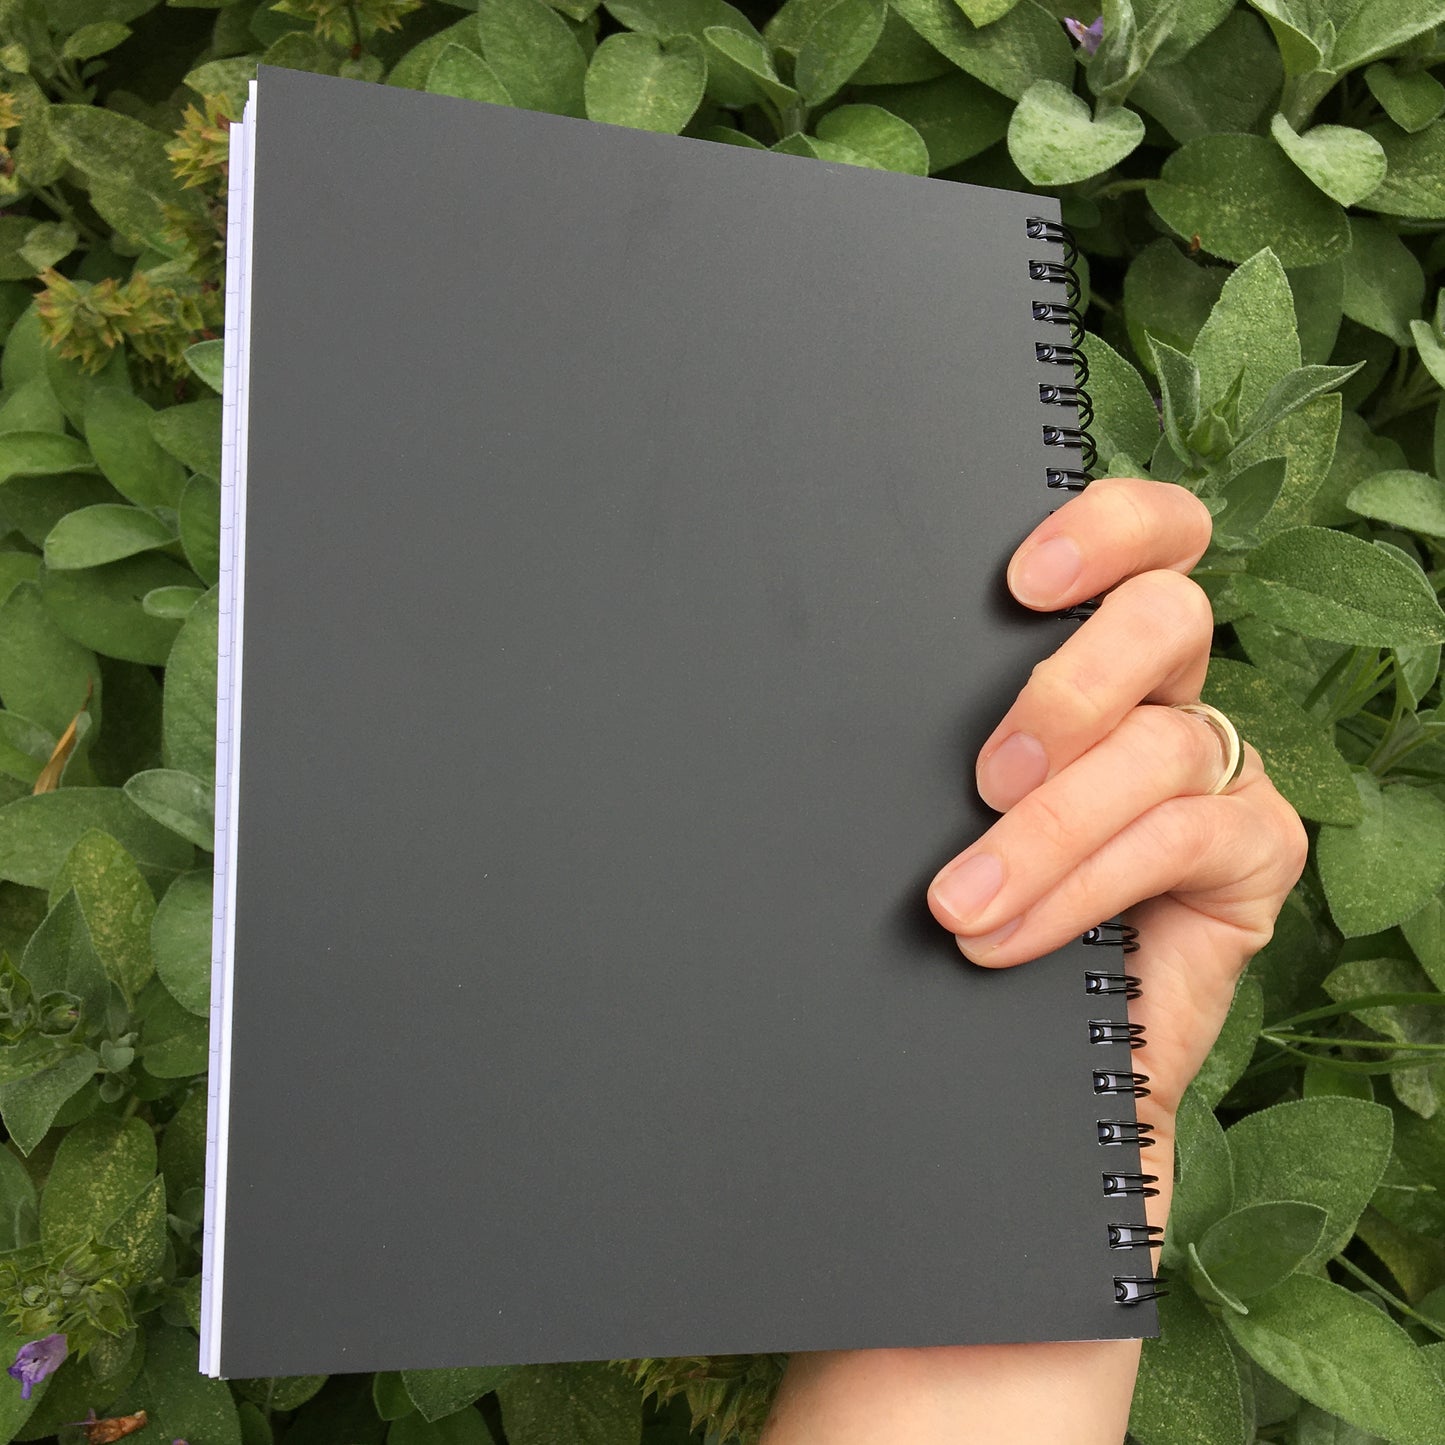 the black back cover of a spiral bound notebook being held in a hand